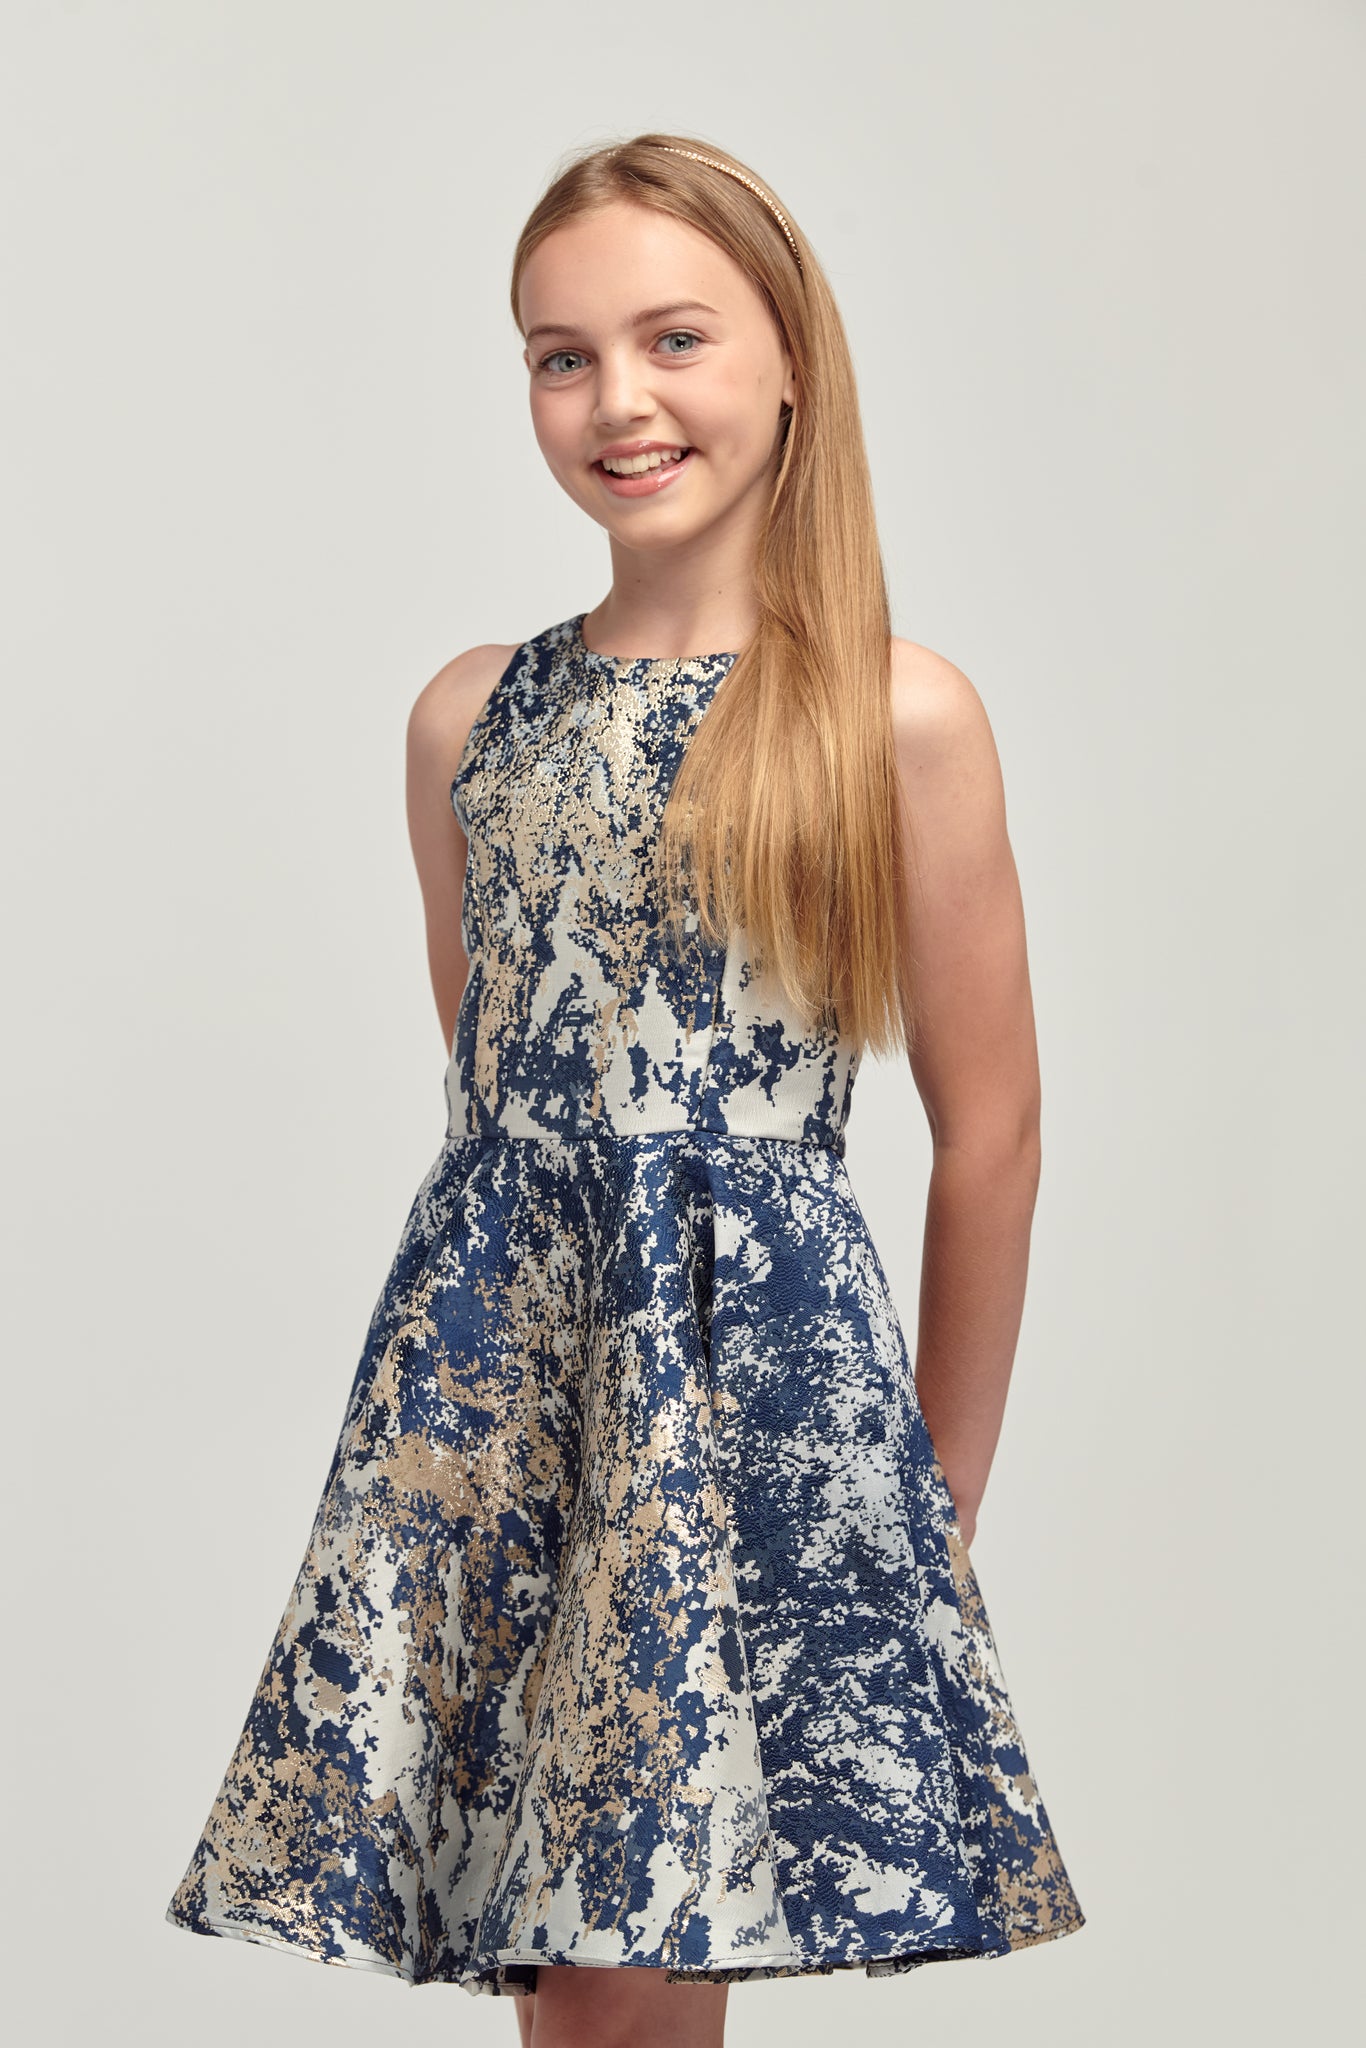 Young girl in navy and gold floral racerback style dress.